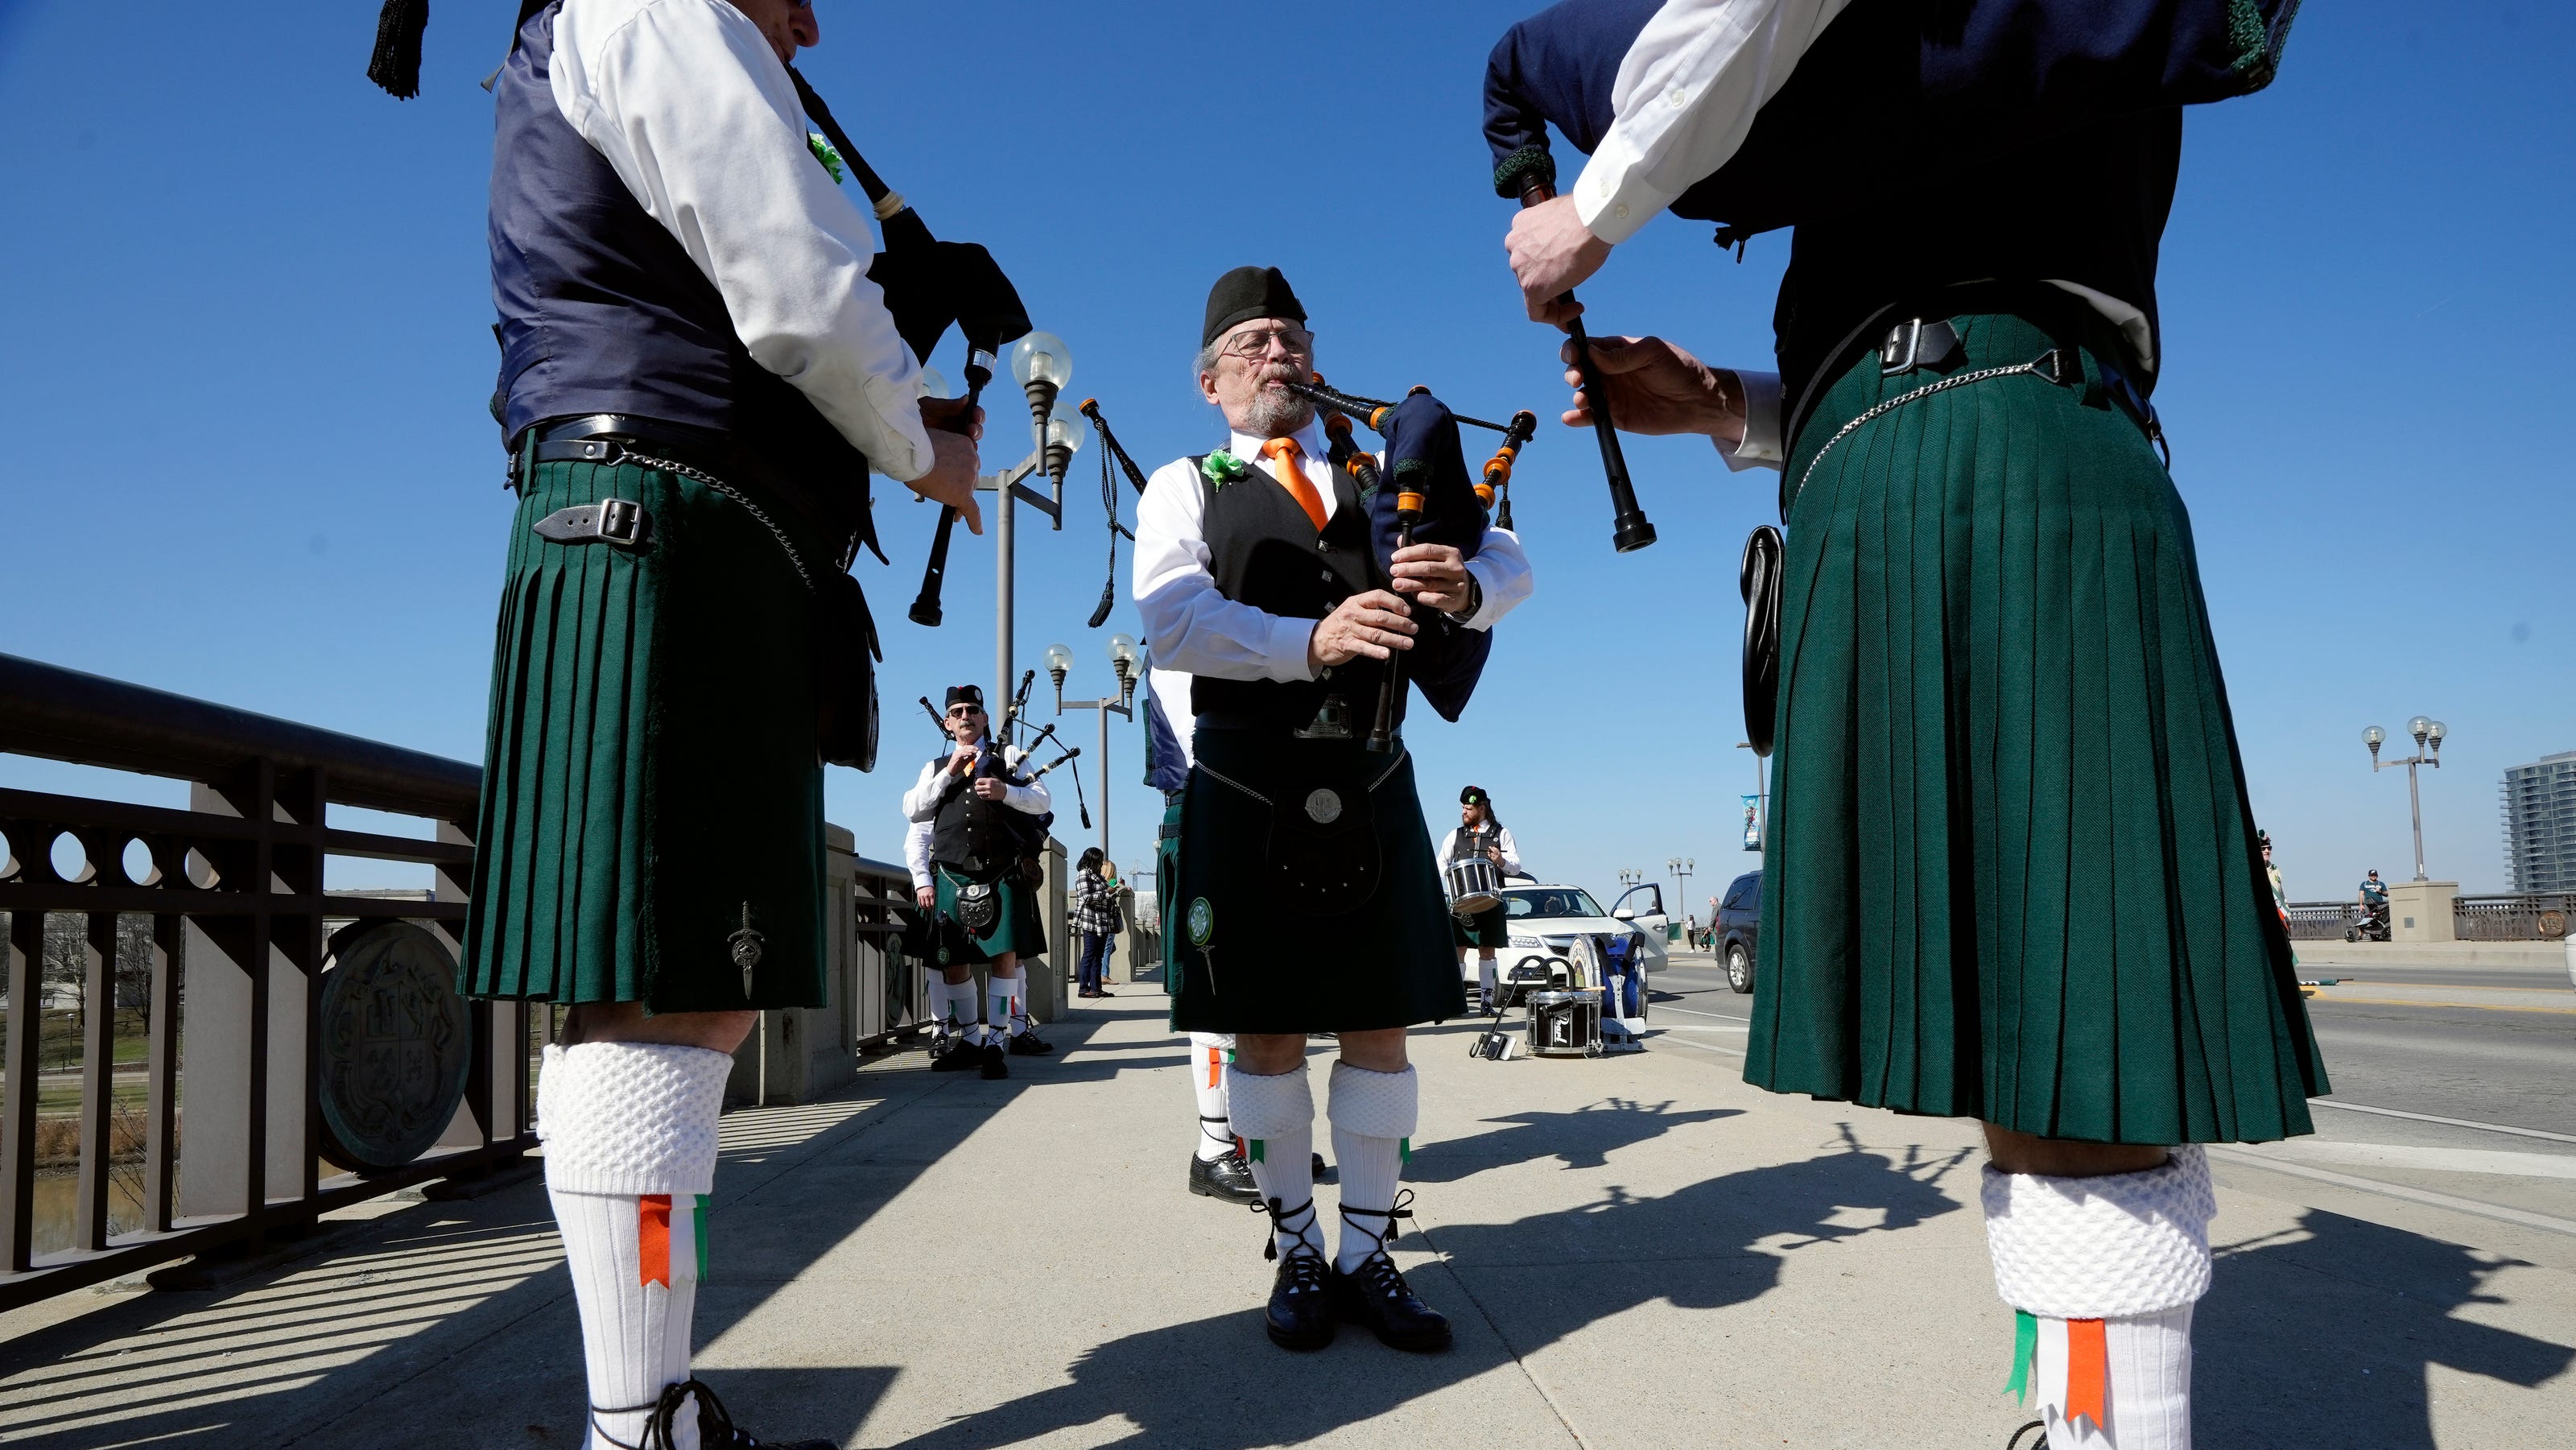 St. Patrick's Day Here is where you can celebrate in Columbus